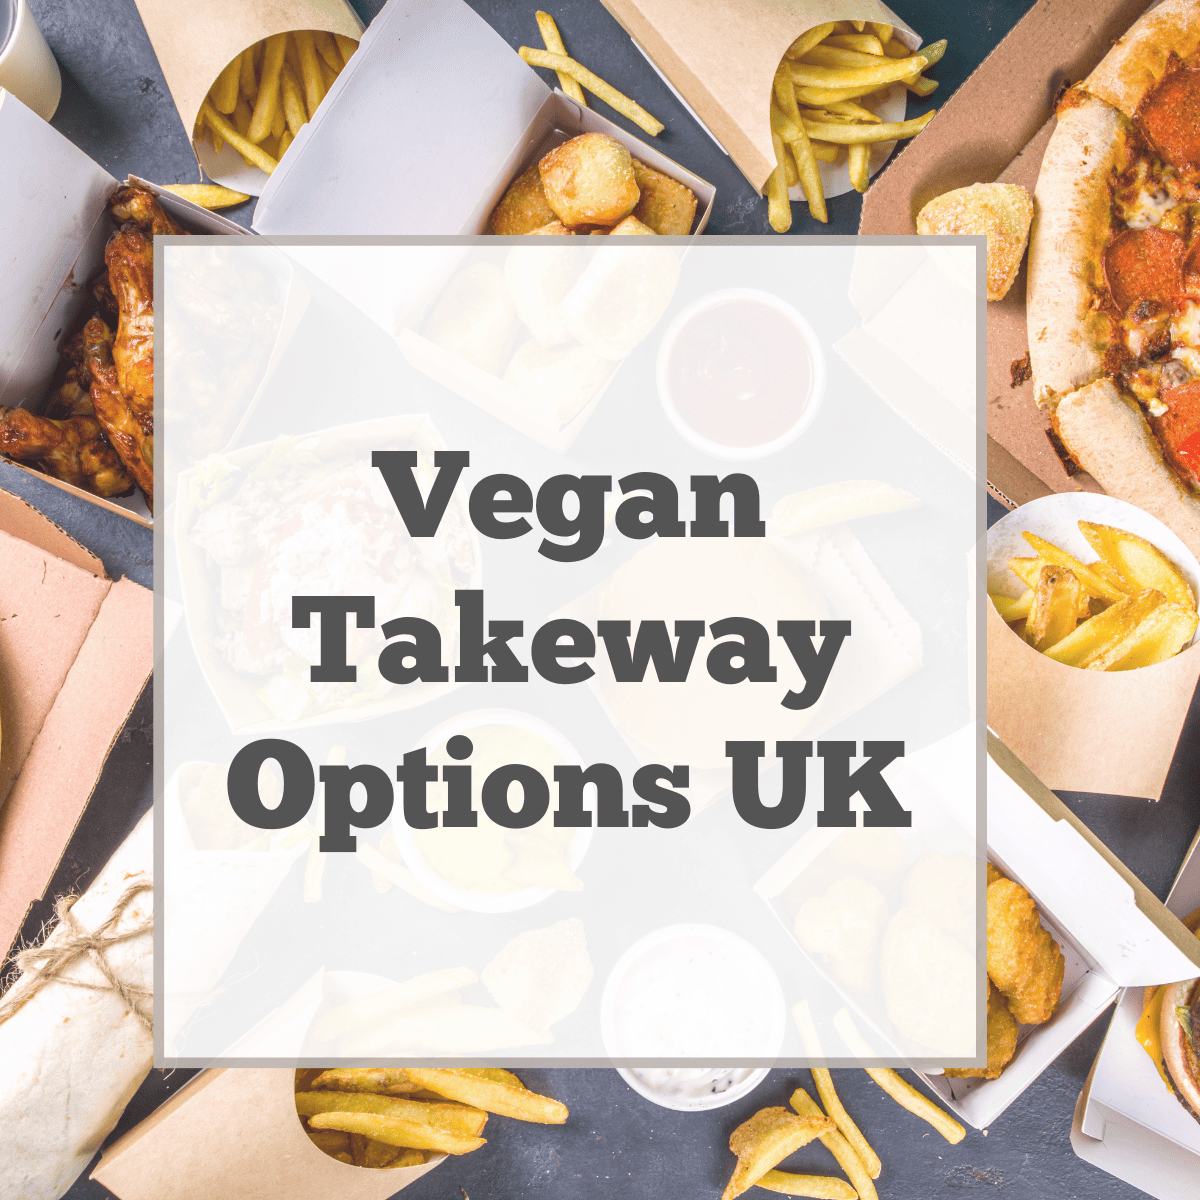 5 Best Places for Vegan takeaways in the UK